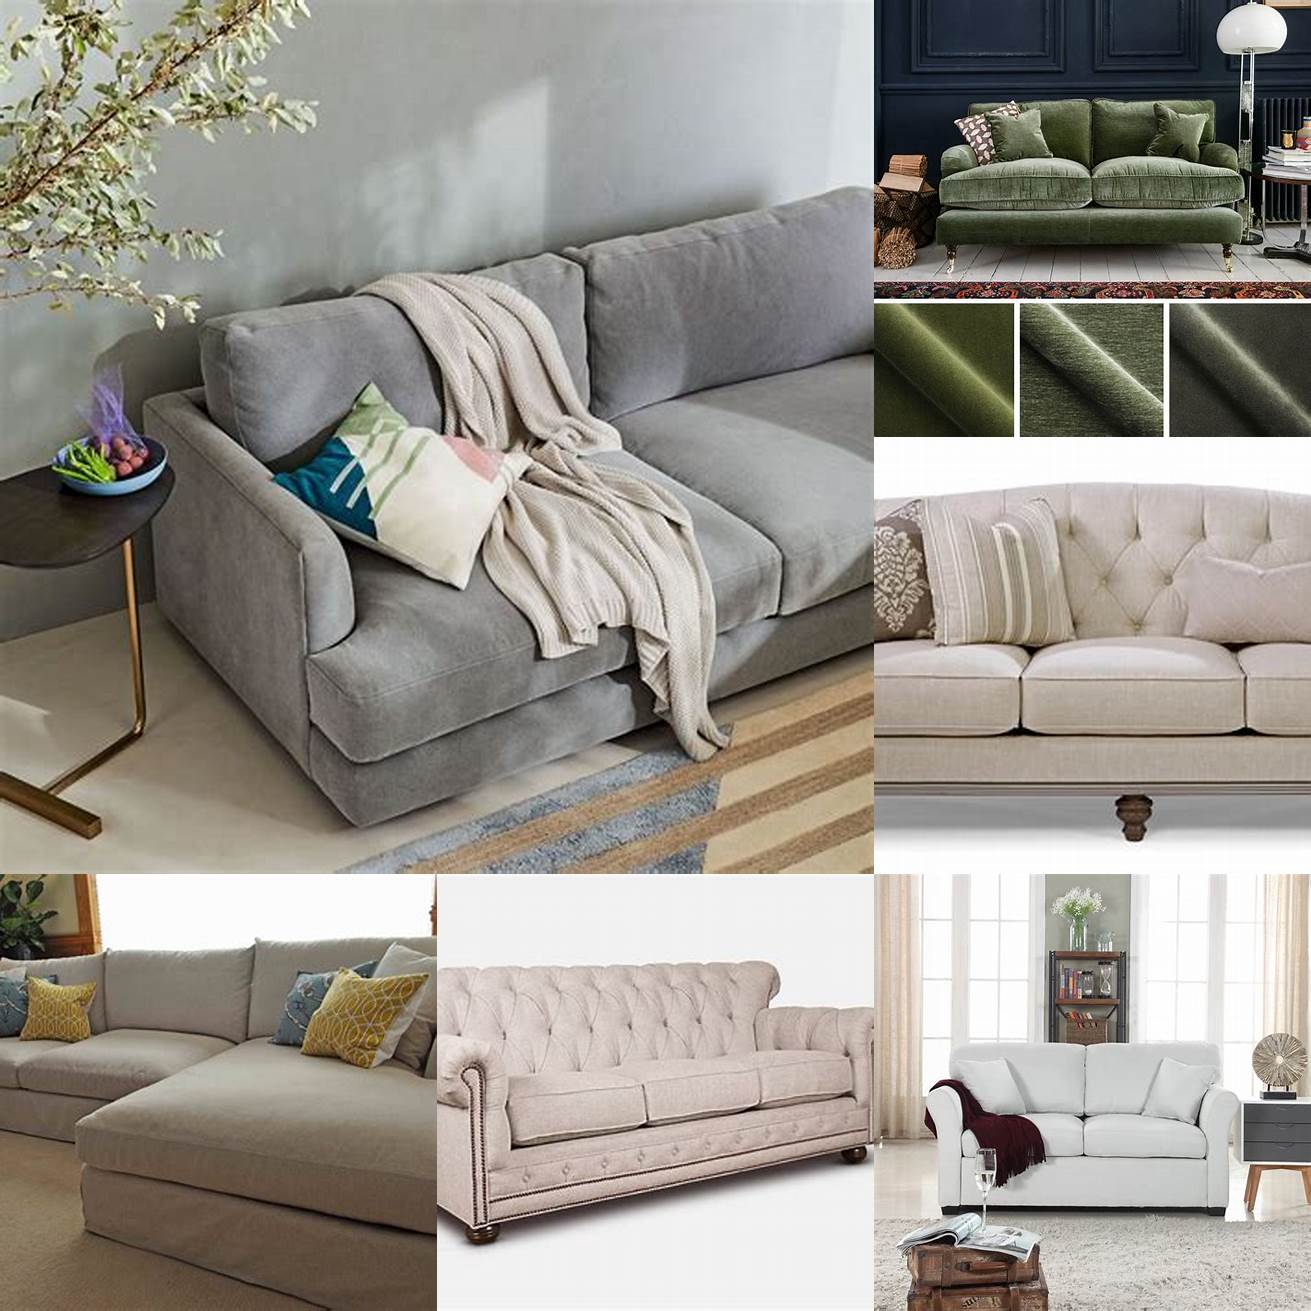 Fabric Fabric high back sofas are soft cozy and available in many textures and patterns They come in various colors from neutral beige and gray to vibrant yellow and green